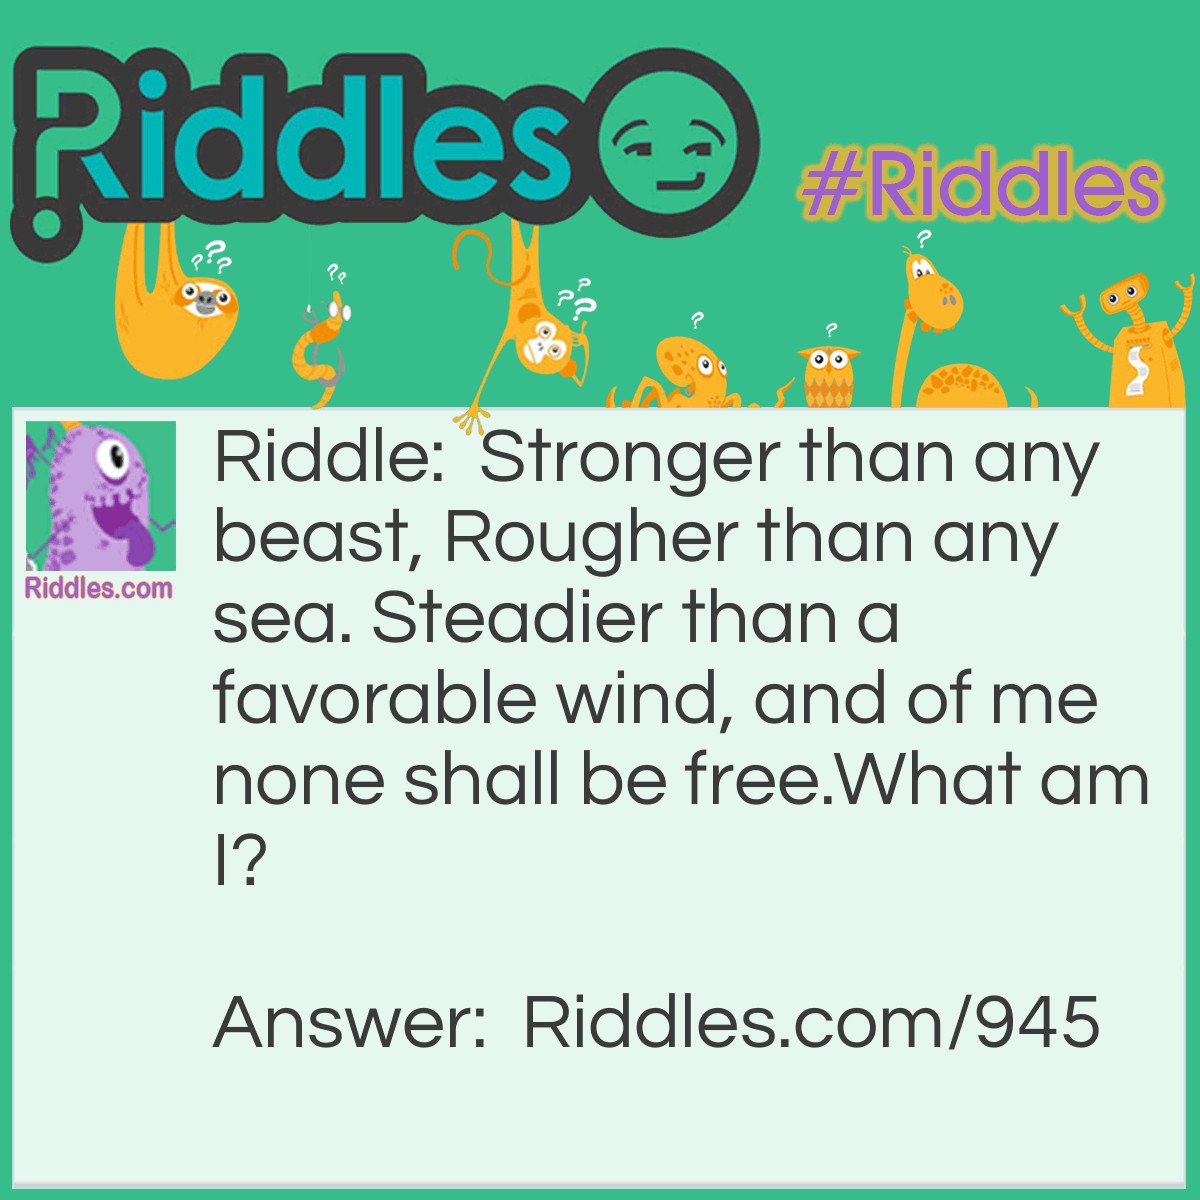 Riddle: Stronger than any beast, Rougher than any sea. Steadier than a favorable wind, and of me none shall be free.
What am I? Answer: I am Earth.